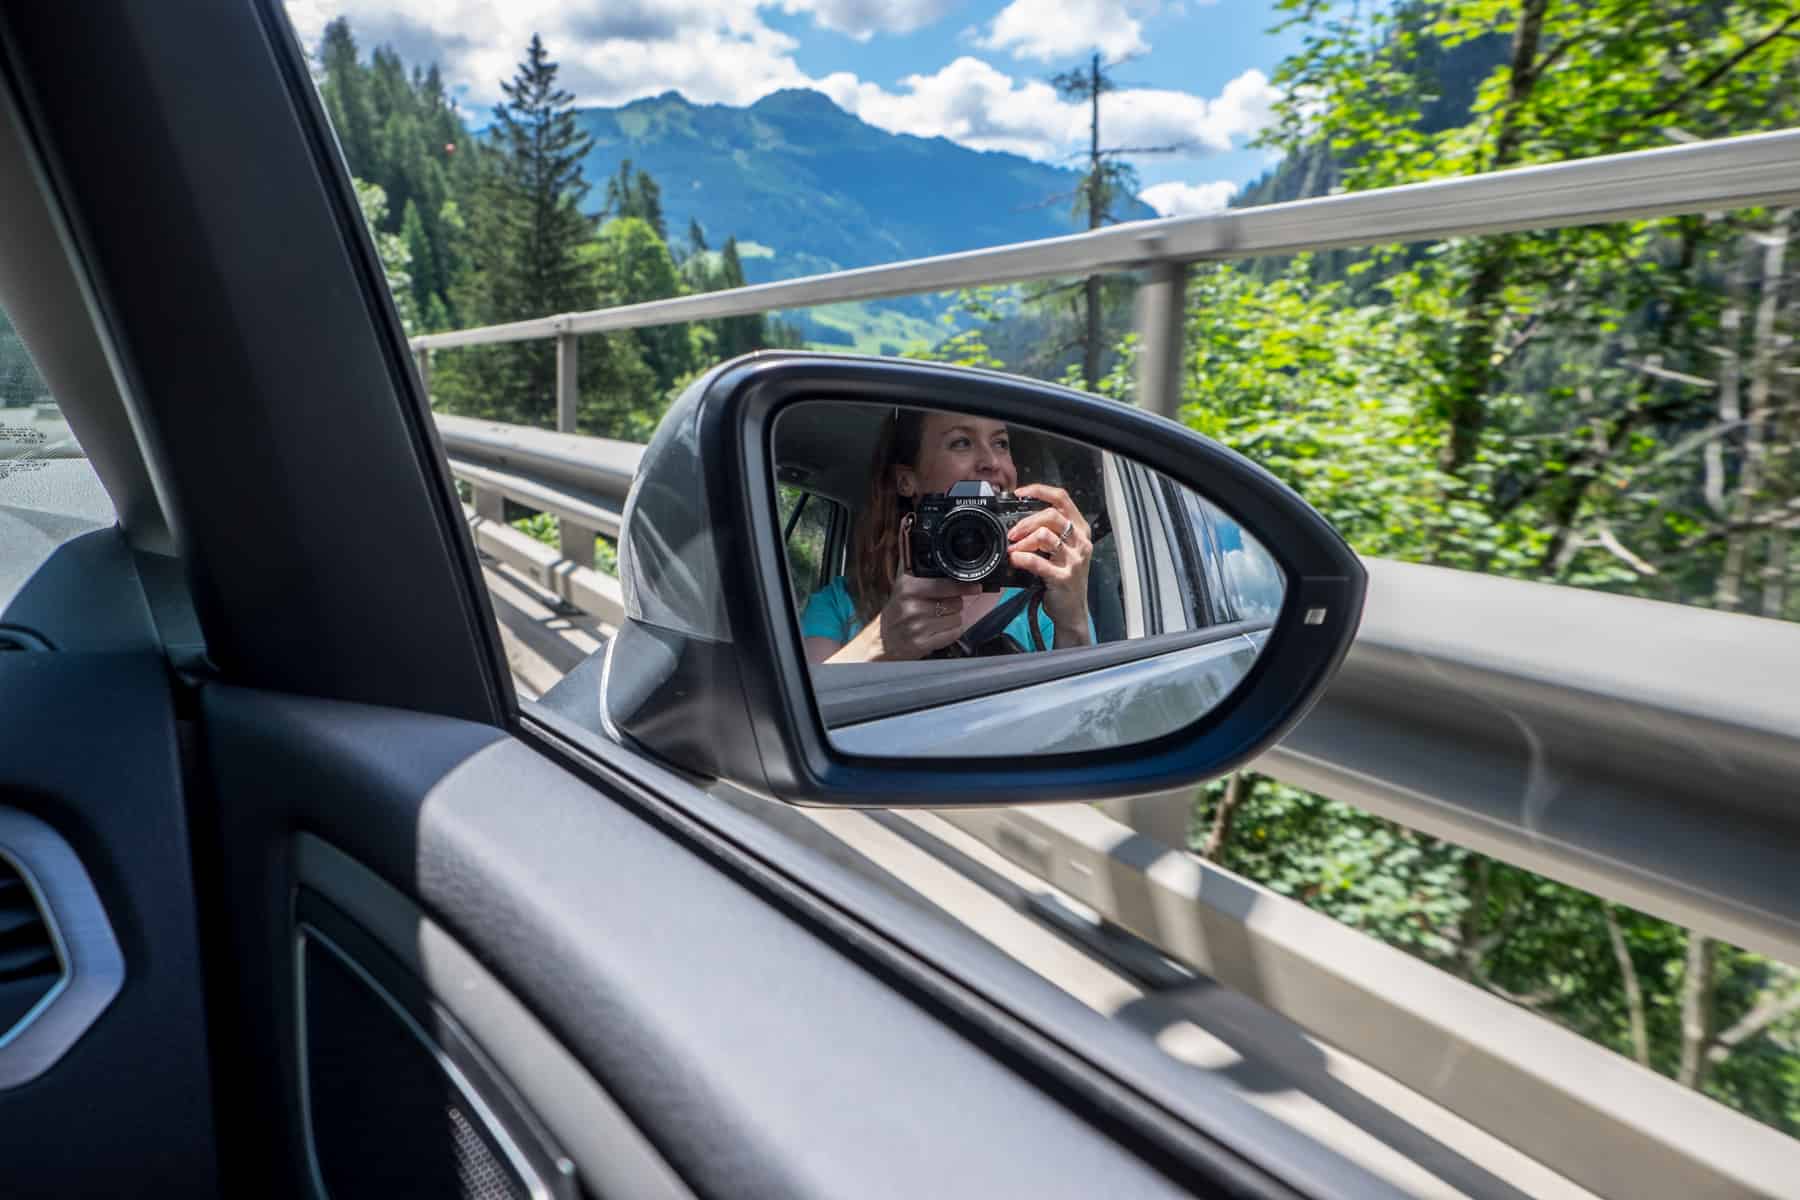 The reflection of a woman holding a camera seen in a car's side mirror. Green forest and mountains can be seen outside in the background